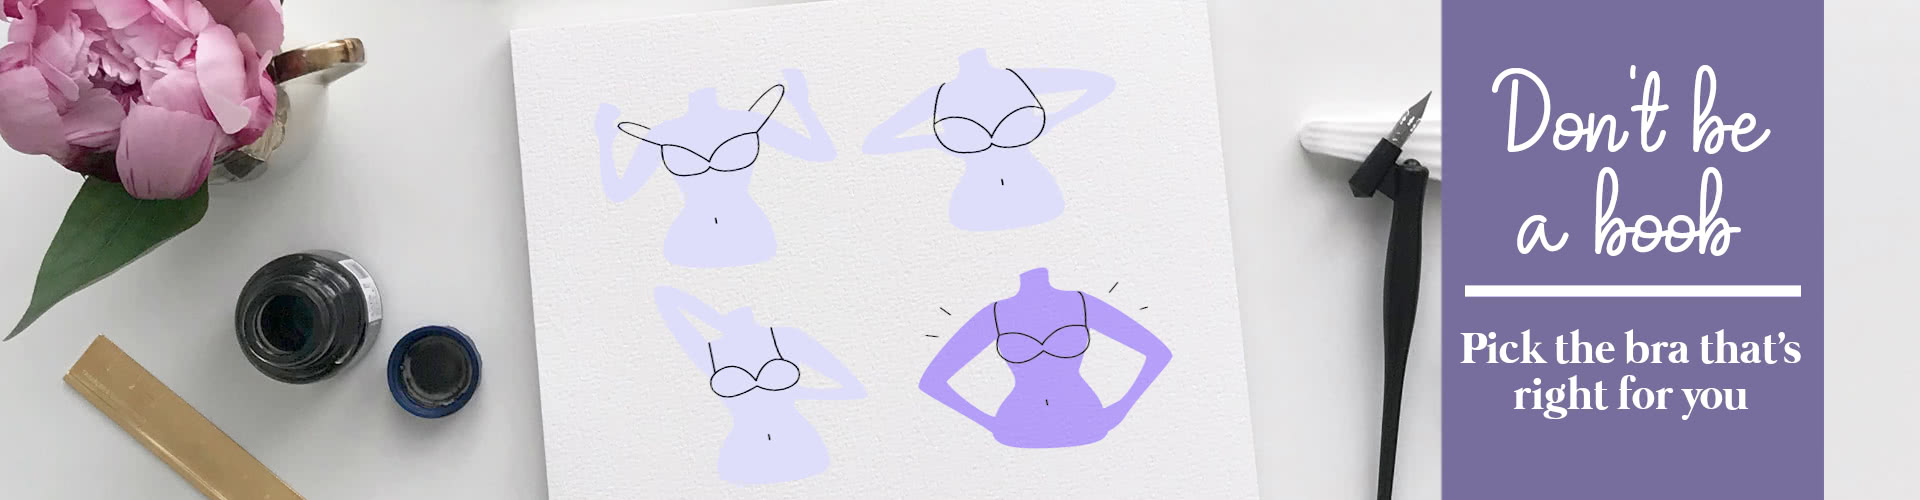 Pick the bra that is right for you.